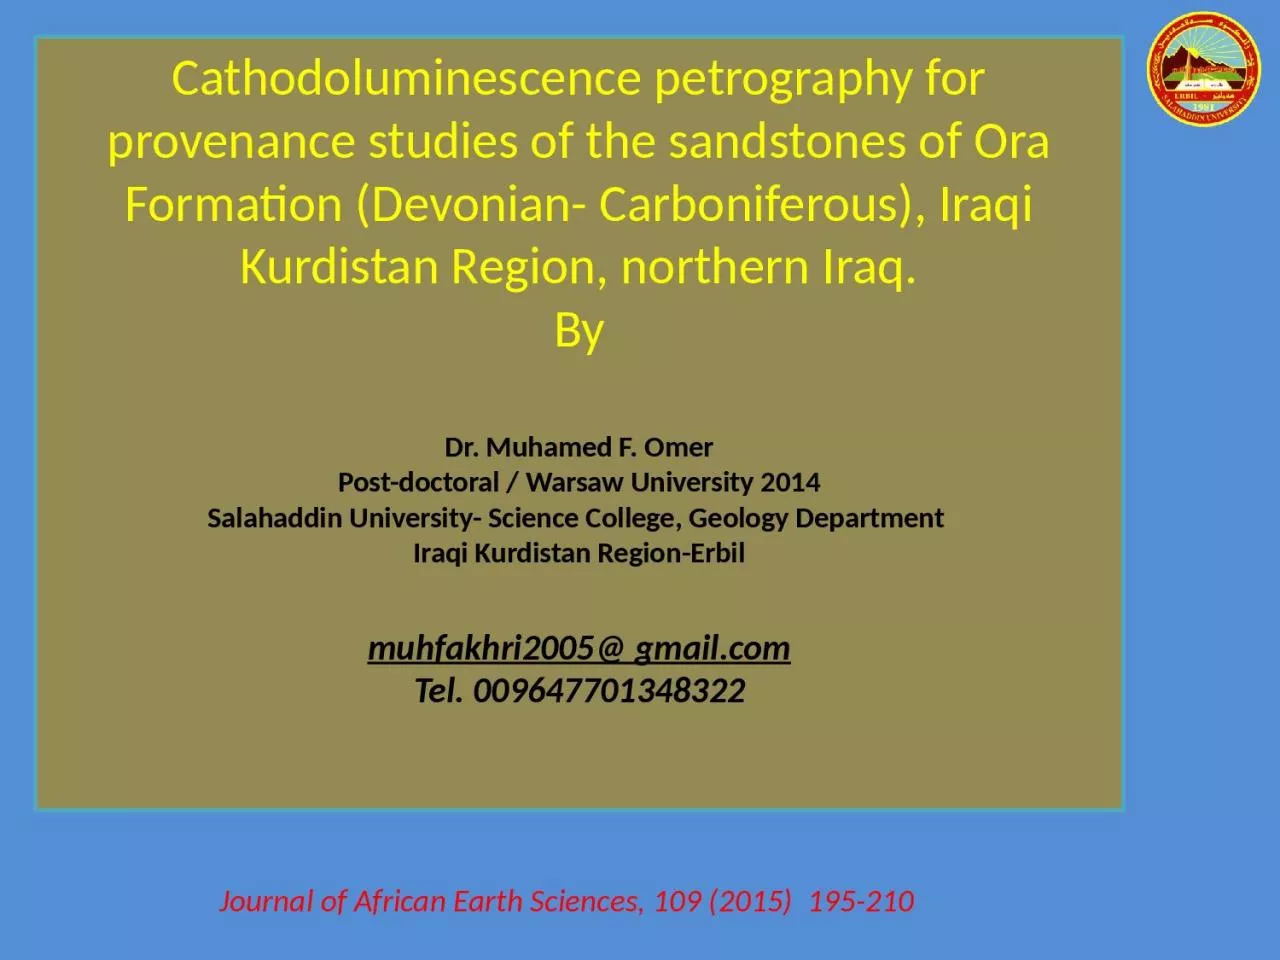 Cathodoluminescence petrography for provenance studies of the sandstones of Ora Formation